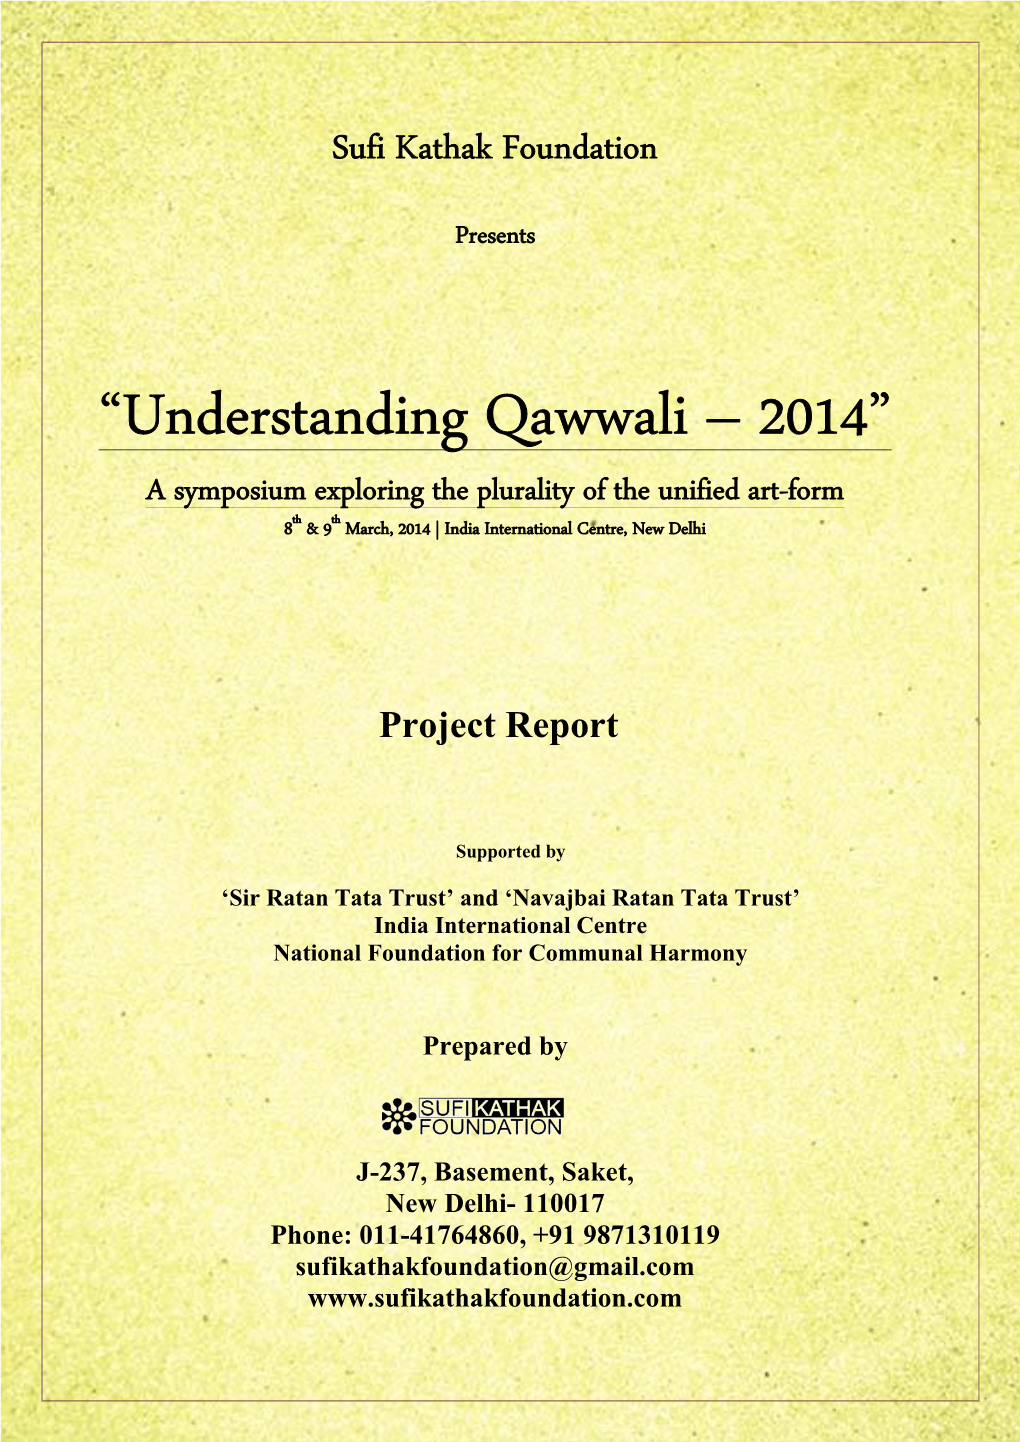 “Understanding Qawwali – 2014” a Symposium Exploring the Plurality of the Unified Art-Form 8Th & 9Th March, 2014 | India International Centre, New Delhi